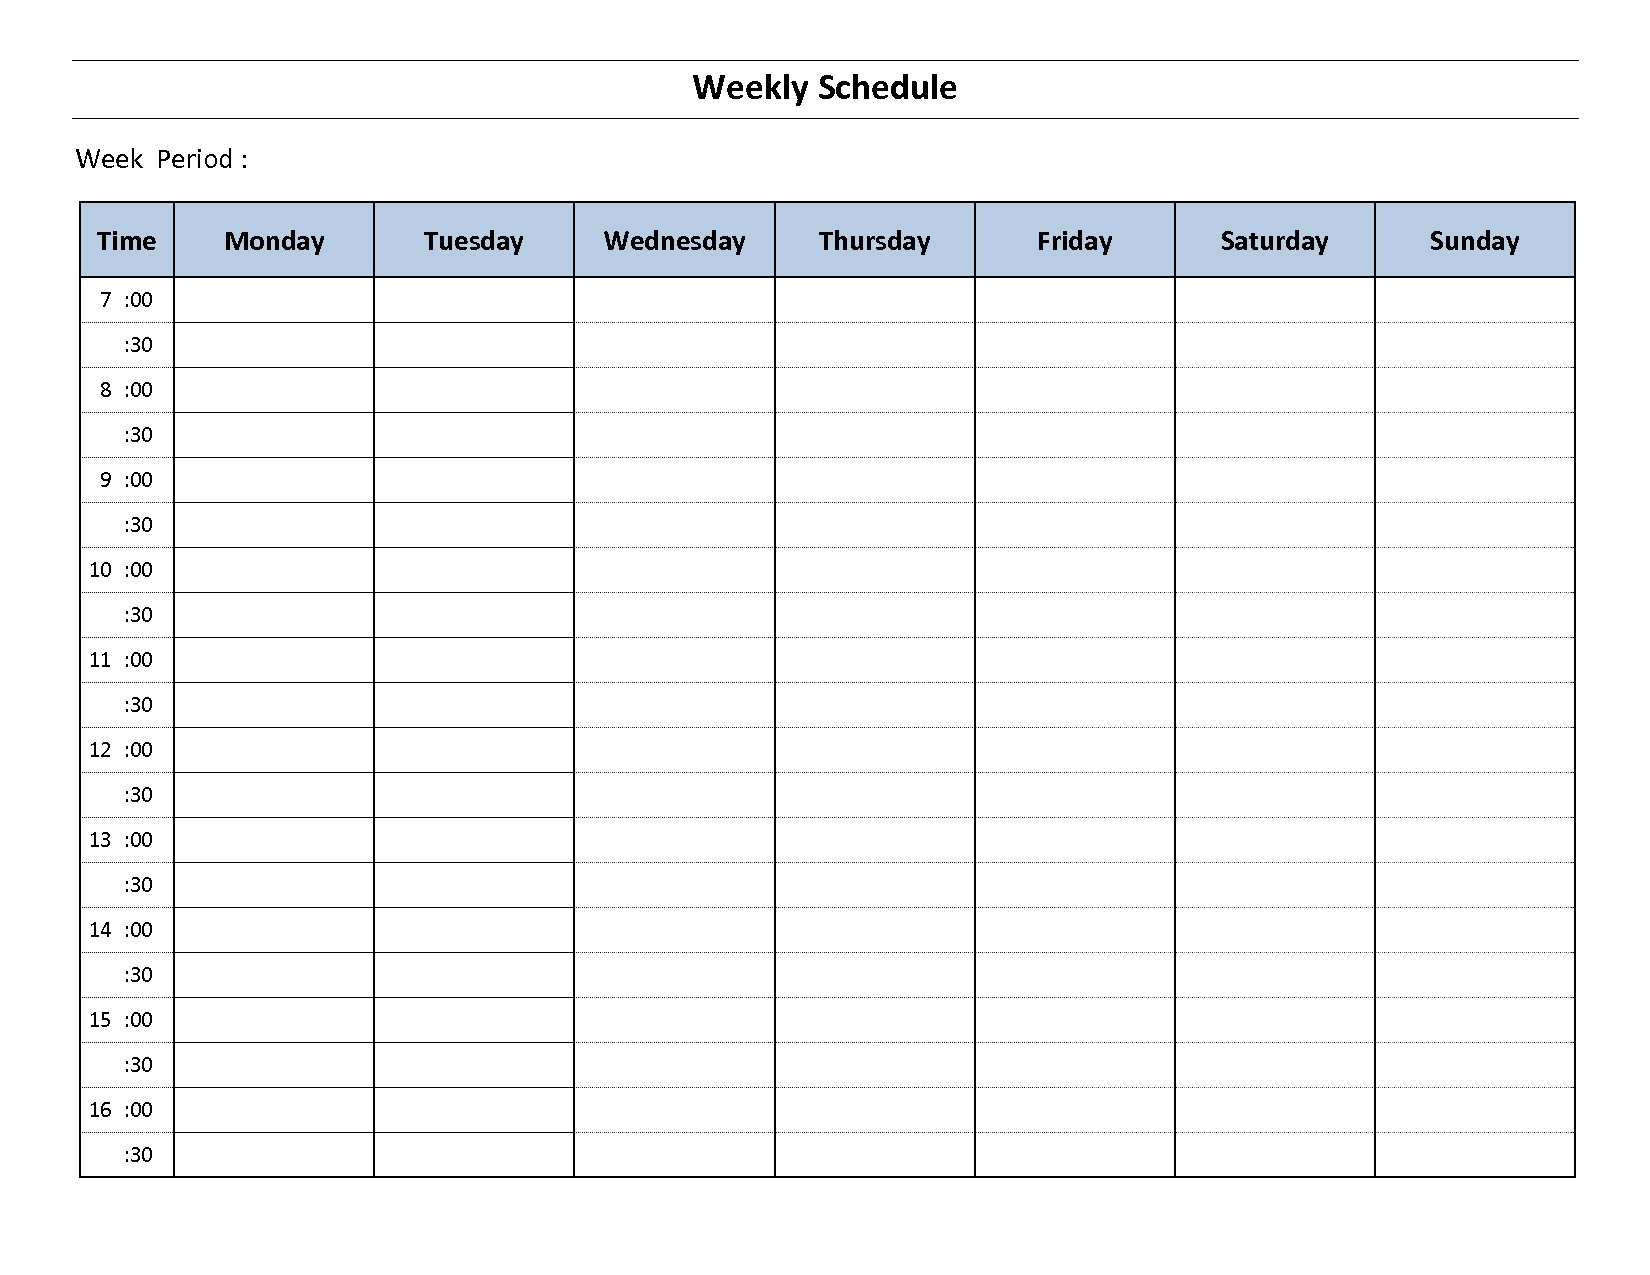 One Week Calendar Template With Hours Blank Excel | Smorad